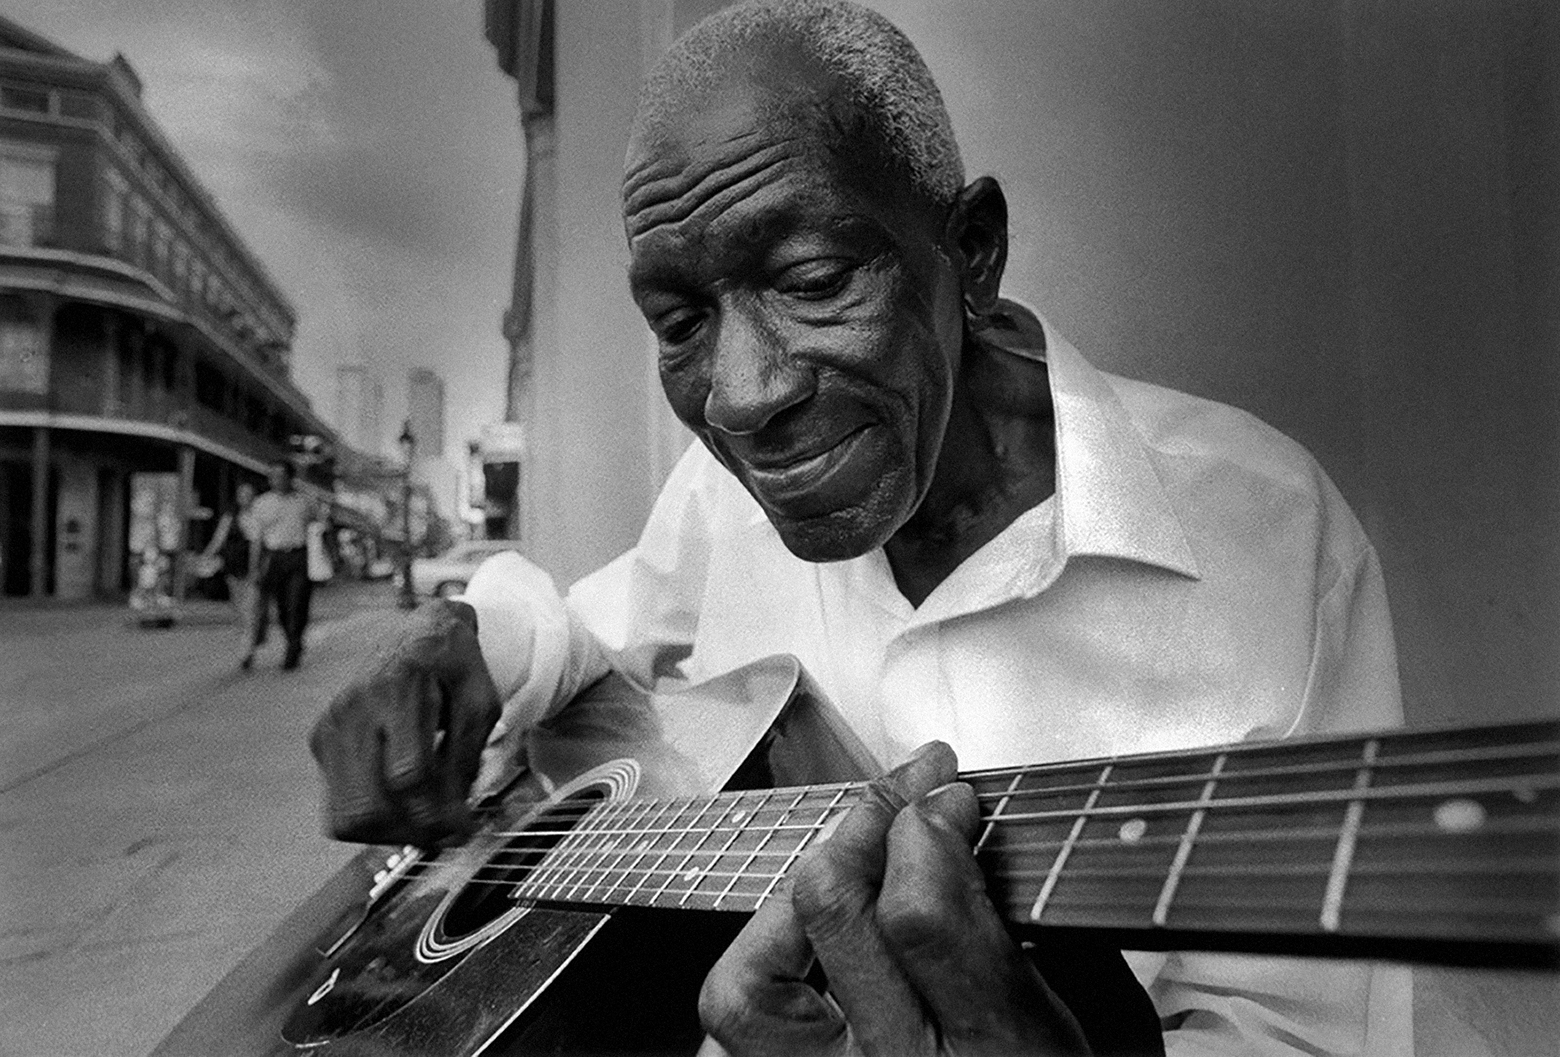 Close-up of a man who sits on a chair on the sidewalk and smiles as he looks down at the guitar he plays.